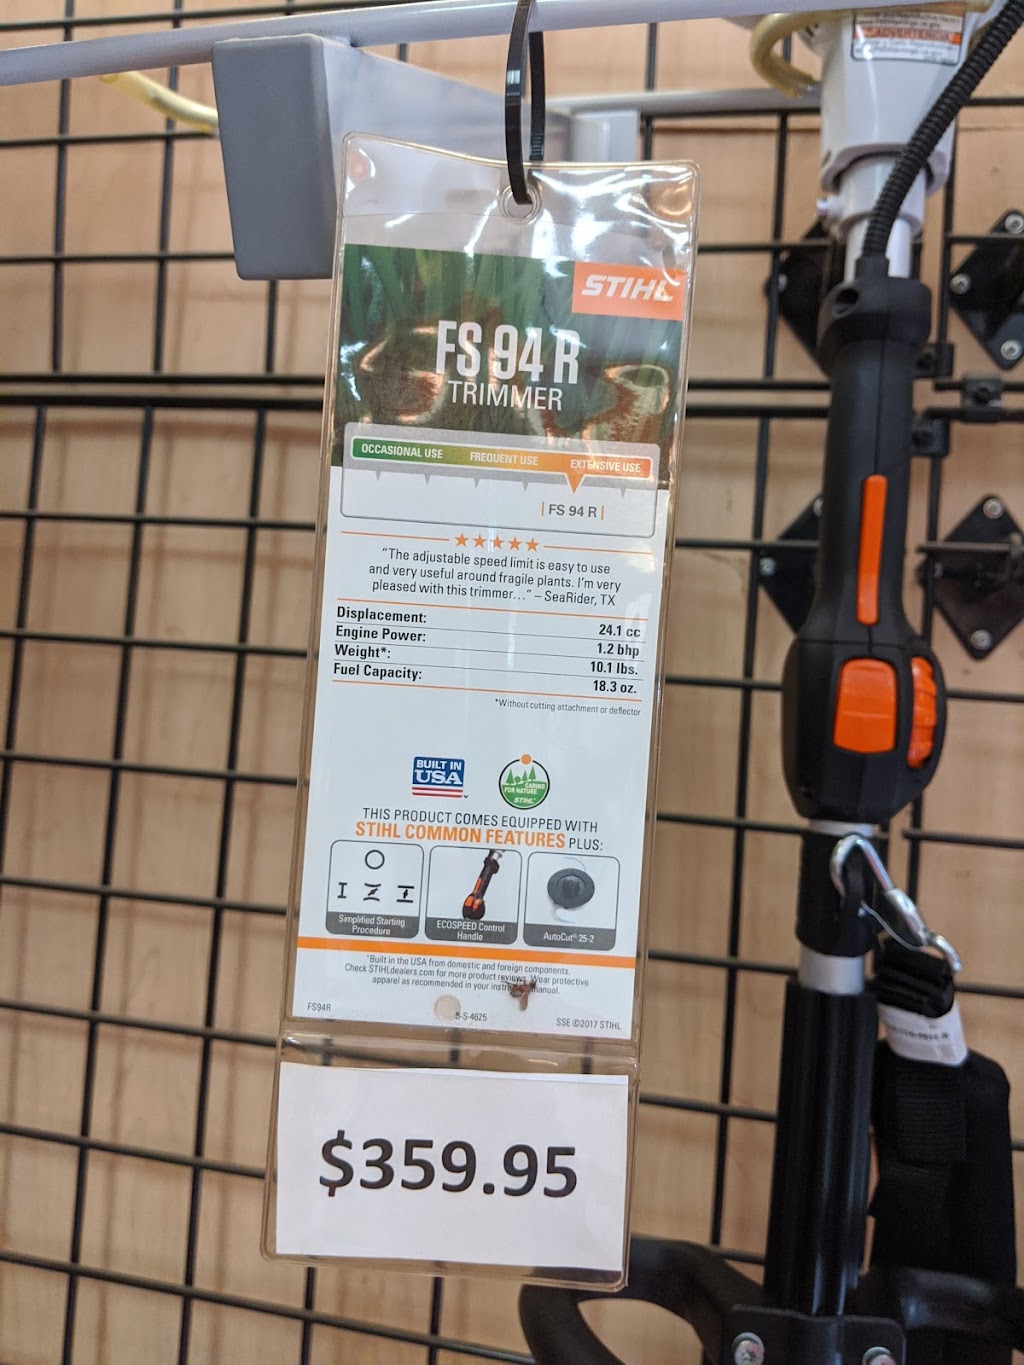 Zachs Outdoor Equipment - store  | Photo 6 of 10 | Address: 3279 US-17, Green Cove Springs, FL 32043, USA | Phone: (904) 284-5239